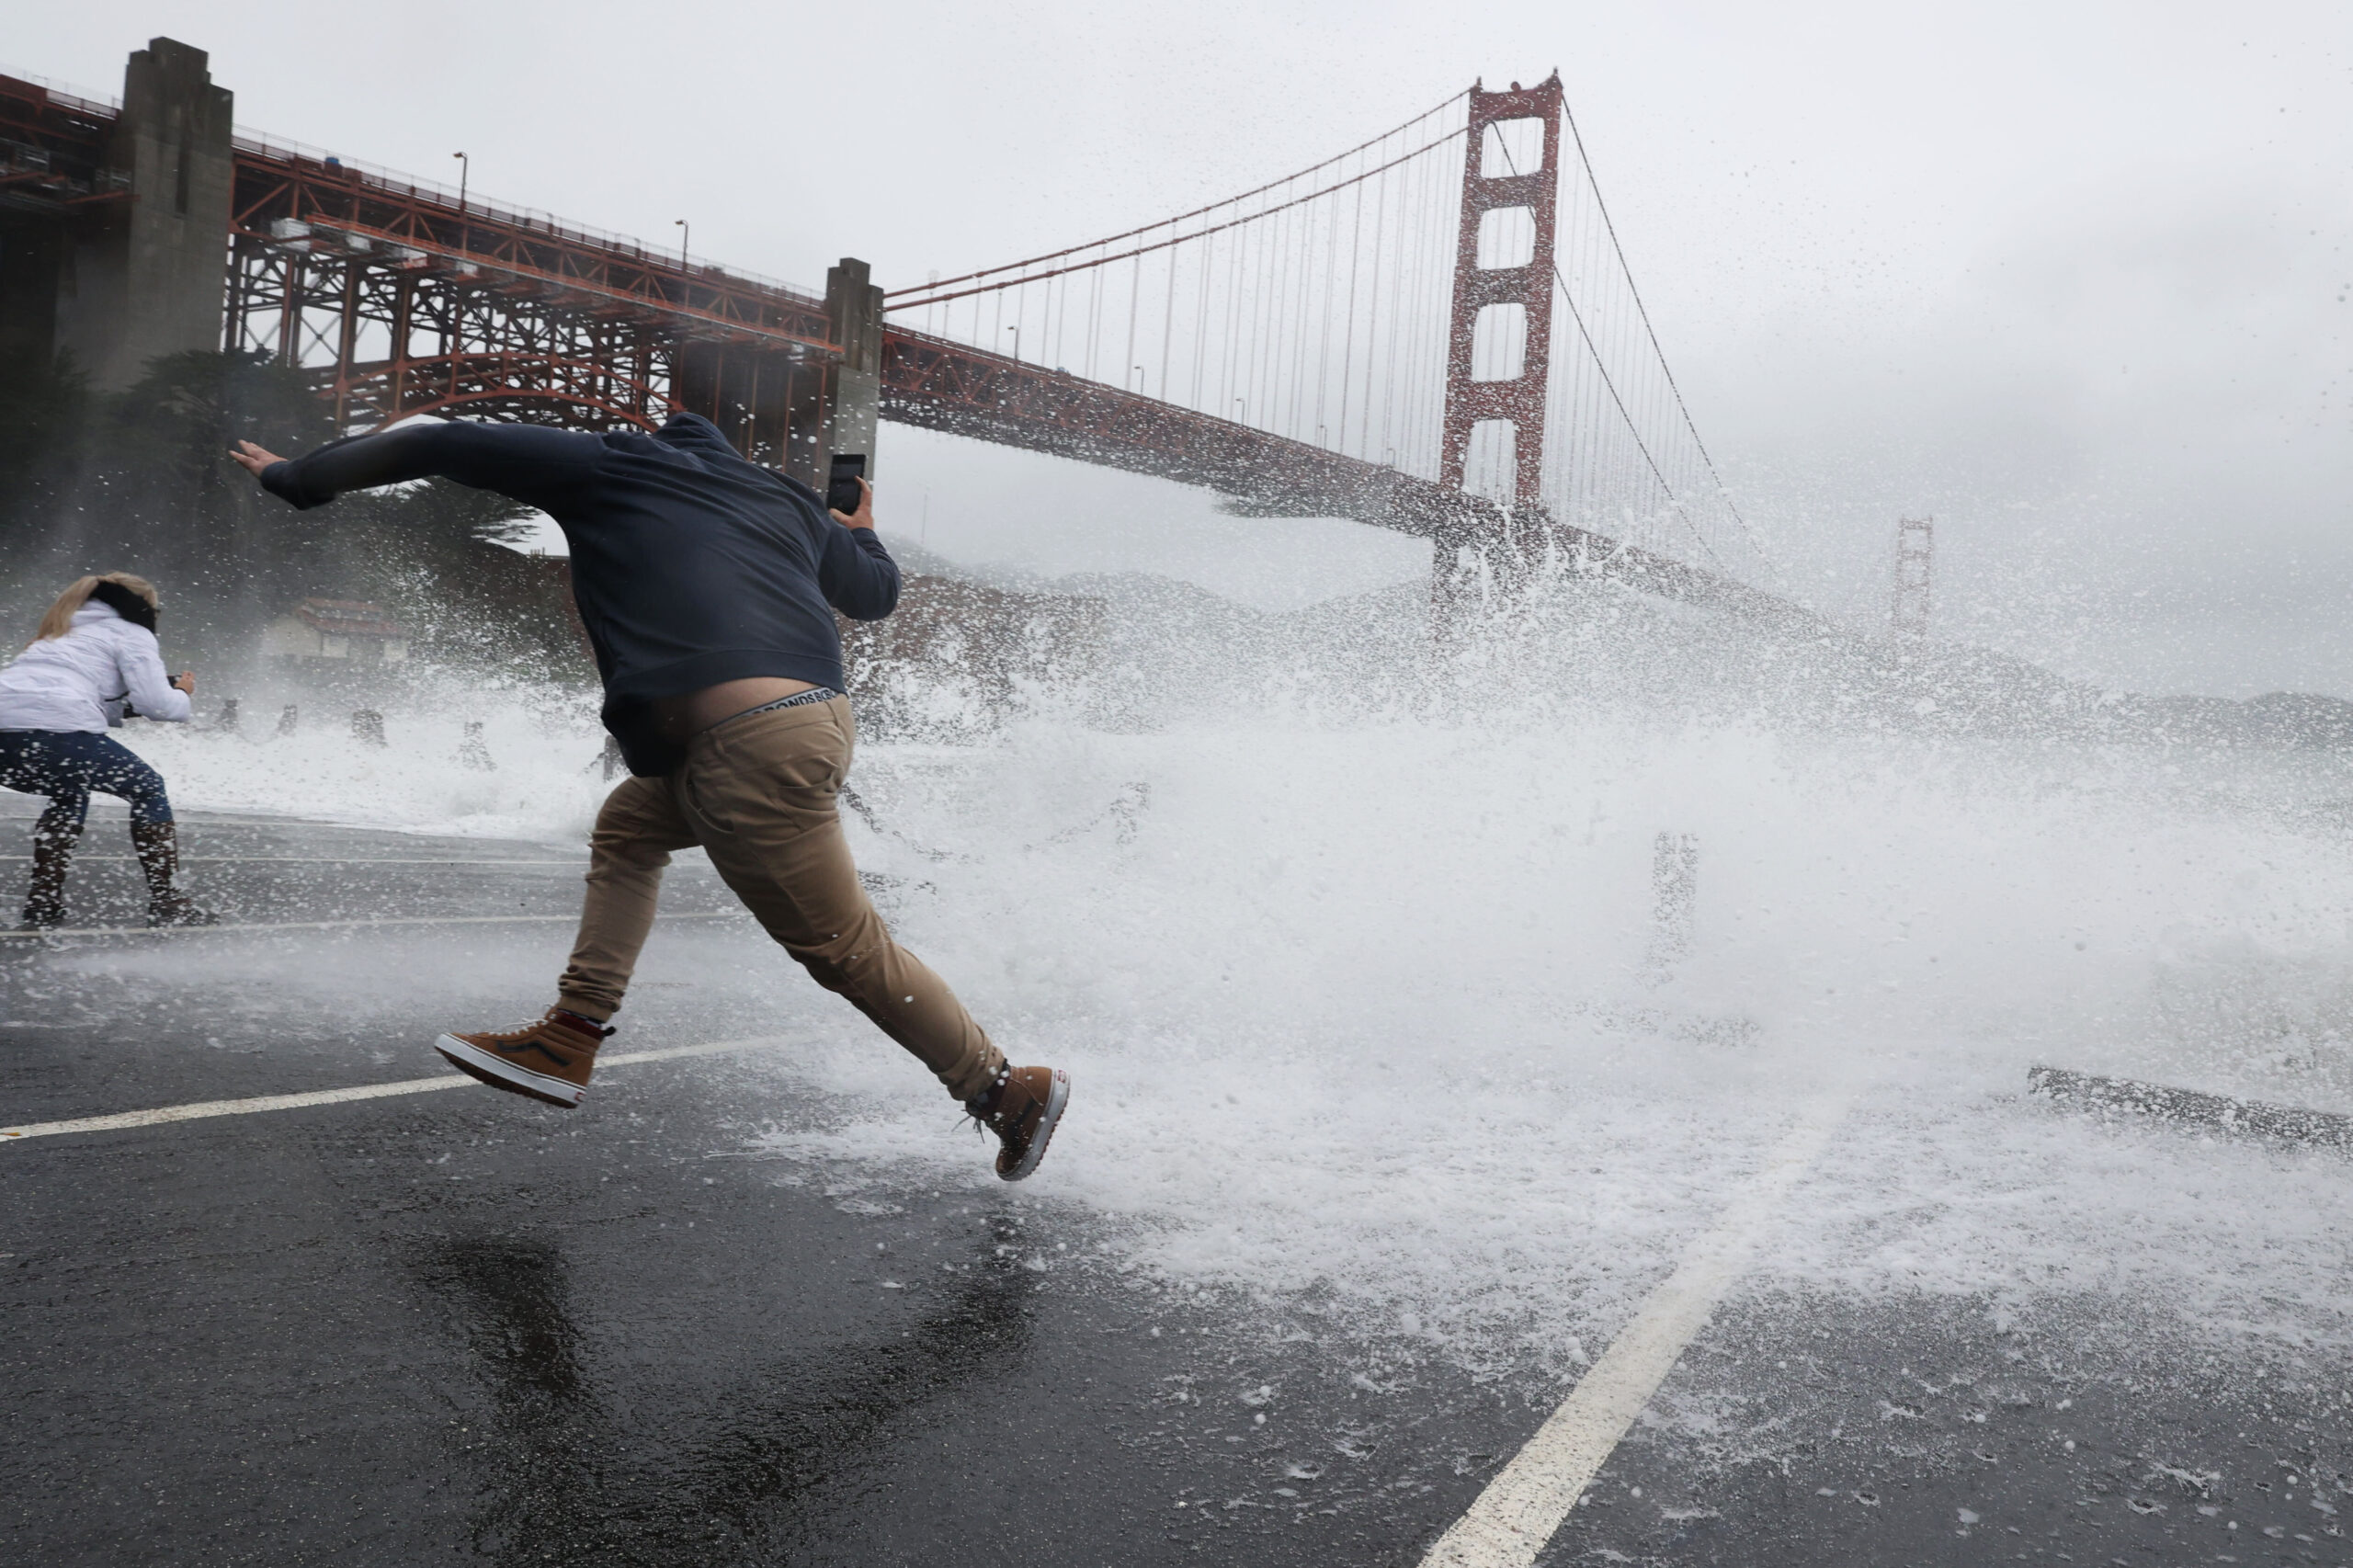 When is San Francisco's rainy season, and how long does it last? - Quora